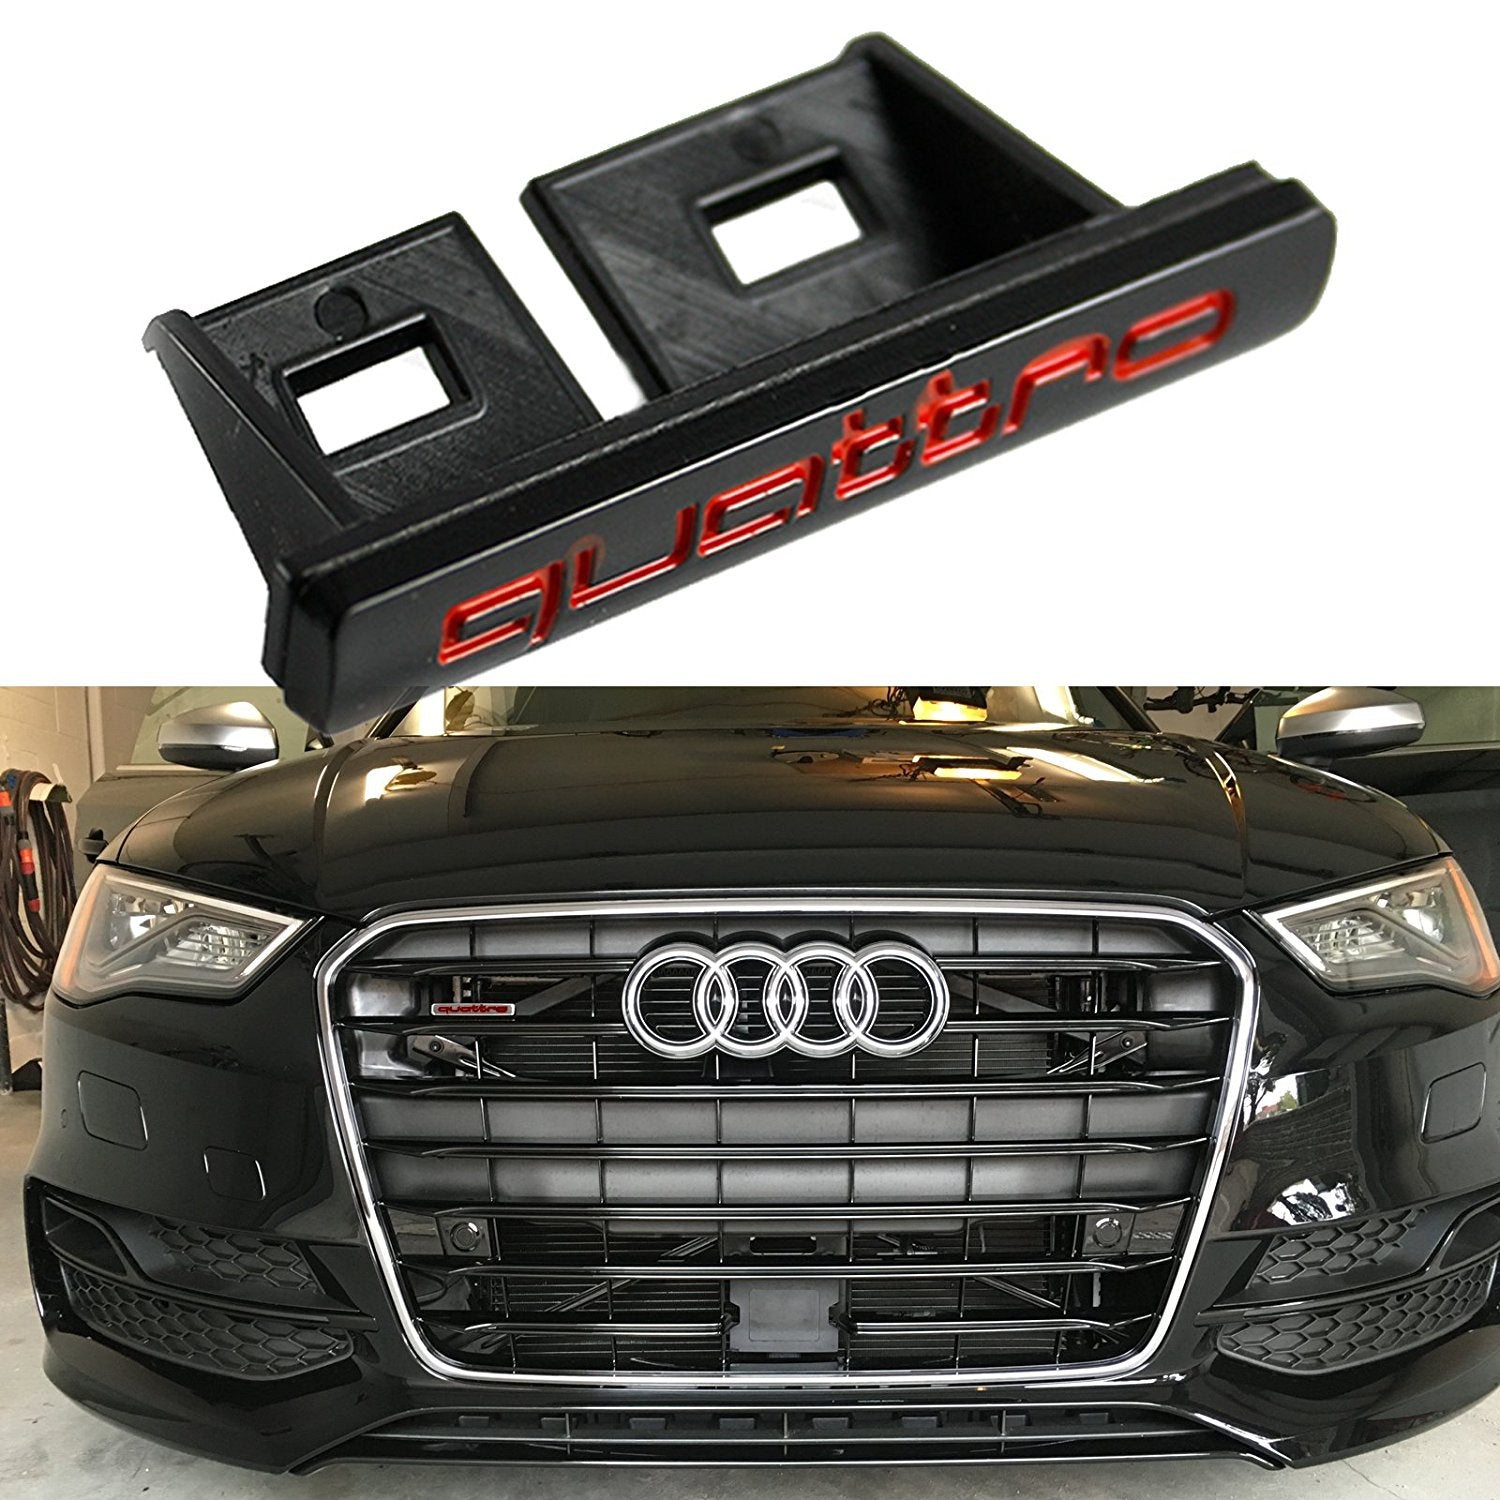 Quattro Front Grille Emblem Badge Black Red For Audi S S4 S5 S6 S8 A4